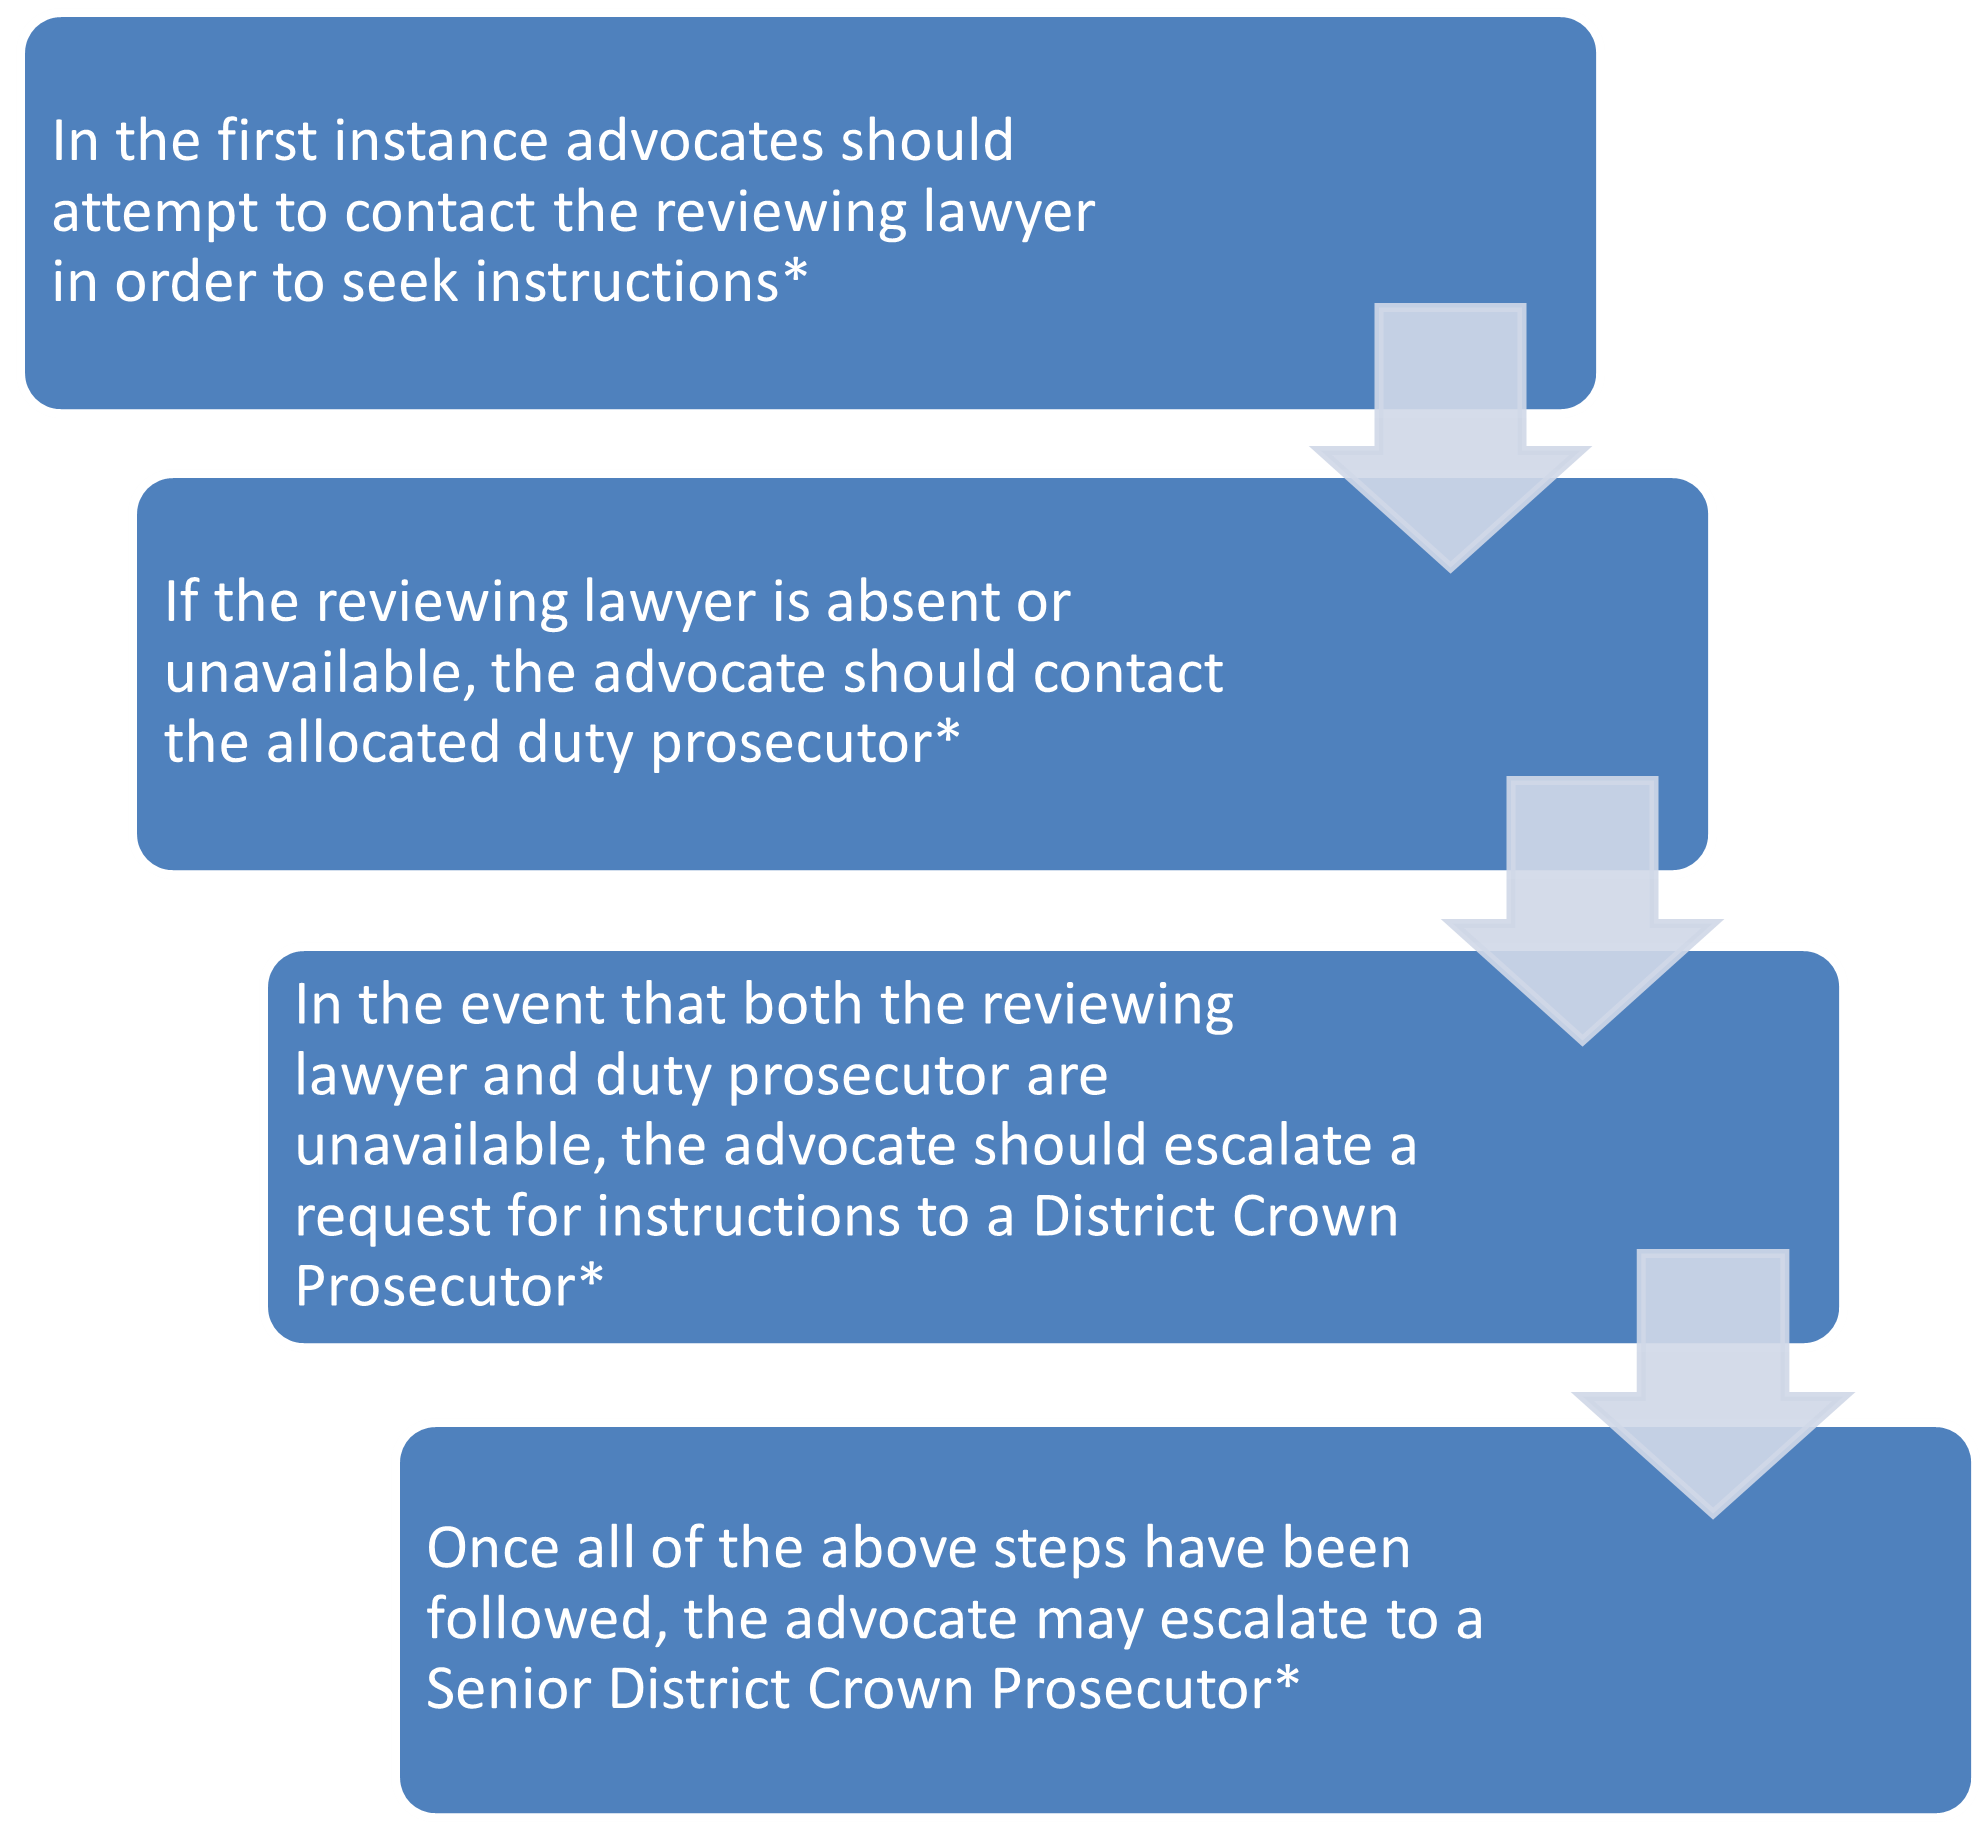 The following steps are outlined in a flow chart, in order: Step 1 - In the first instance advocates should attempt to contact the reviewing lawyer in order to seek instructions* Step 2: If the reviewing lawyer is absent or unavailable, the advocate should contact the allocated duty prosecutor* Step 3 -  In the event that both the reviewing lawyer and duty prosecutor are unavailable, the advocate should escalate a request for instructions to a District Crown Prosecutor* Step 4 - Once all of the above steps have been followed, the advocate may escalate to a Senior District Crown Prosecutor* - NB each of these steps is followed by an astesrisk, referring to the text that follows on this page